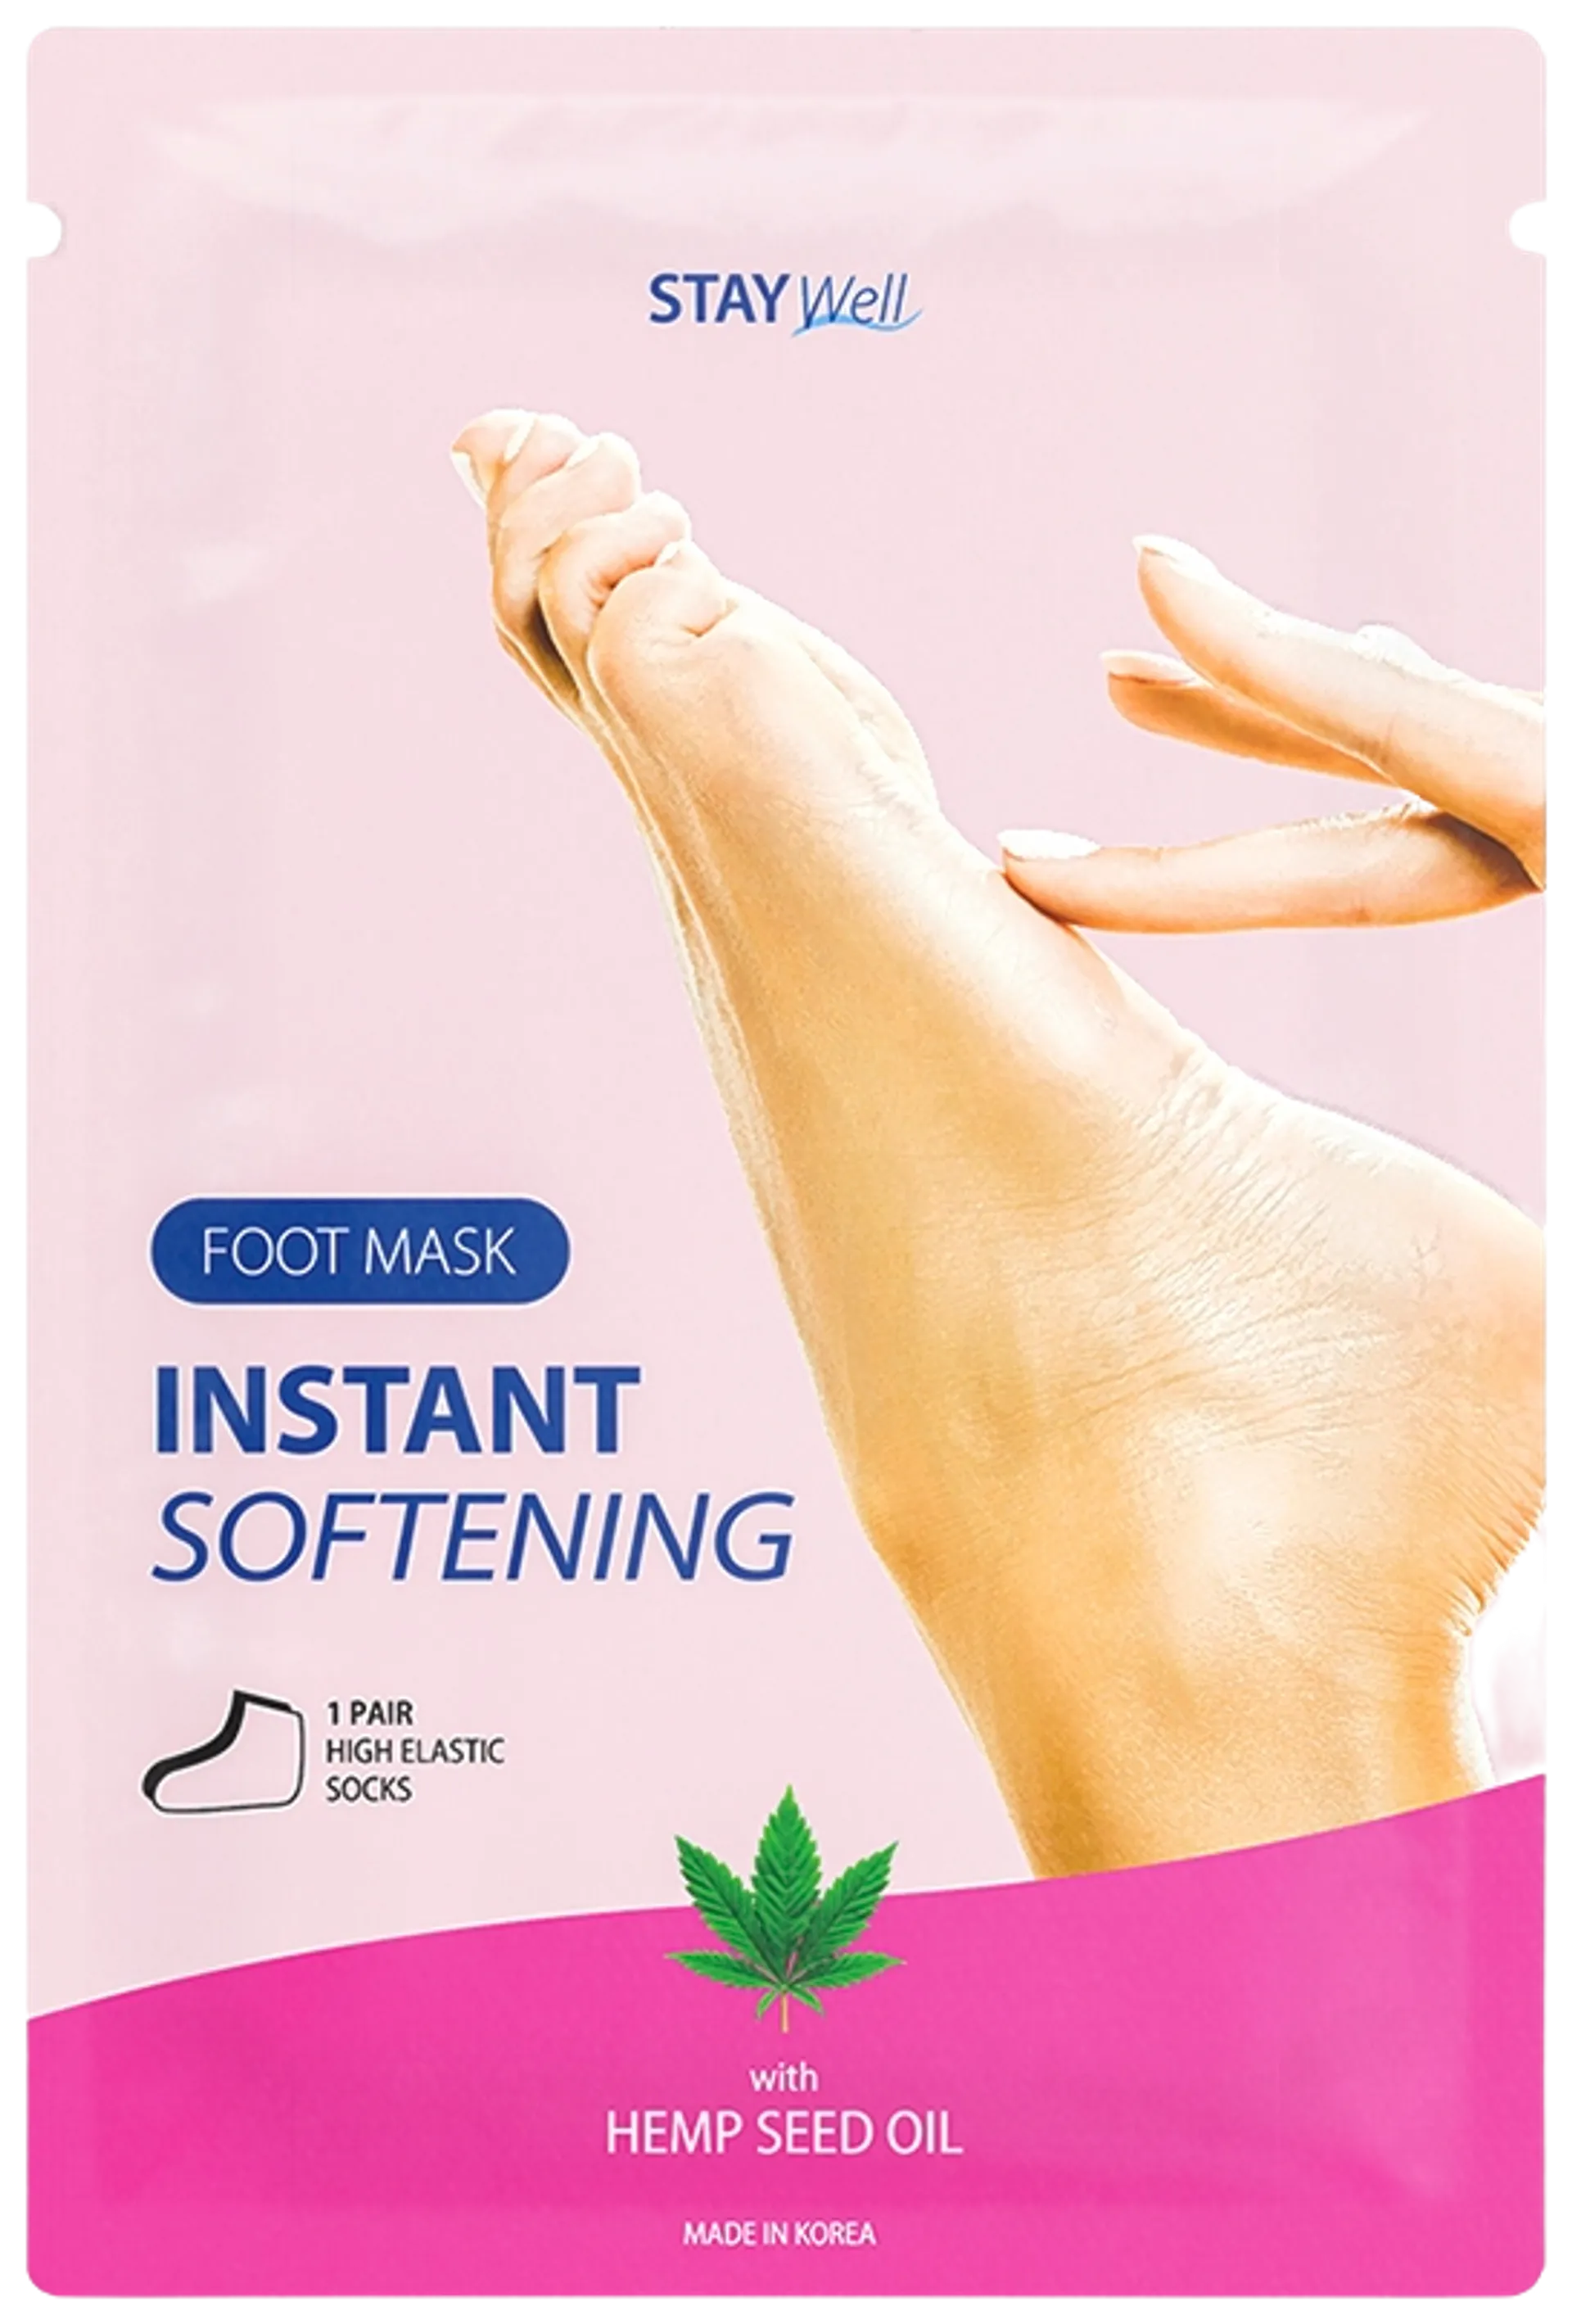 STAY Well Instant Softening Foot Mask HEMP SEED